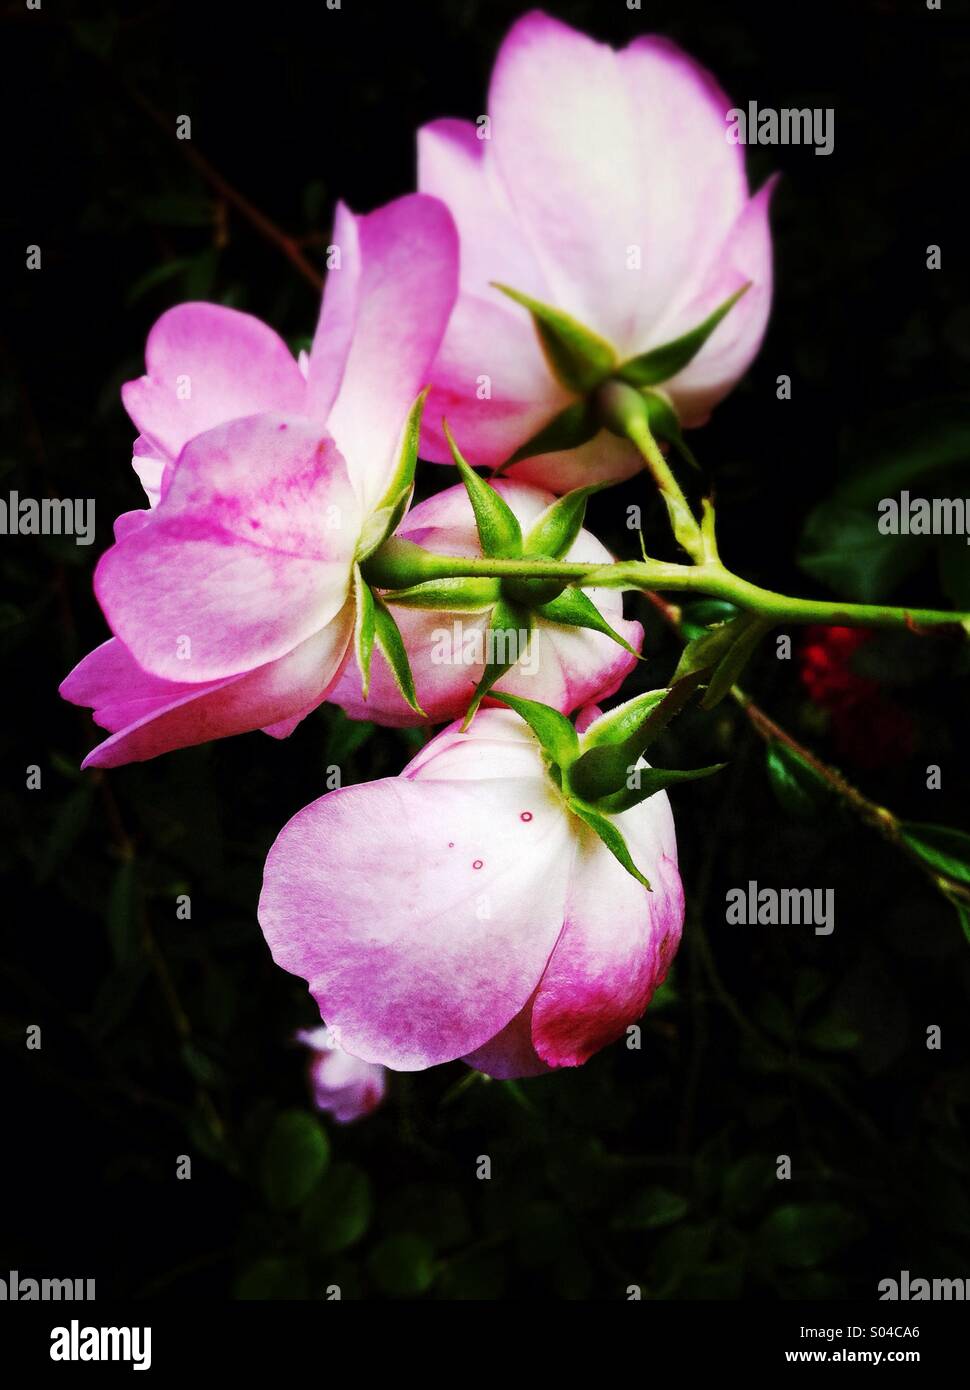 pink rose blossoms on a black surface Stock Photo